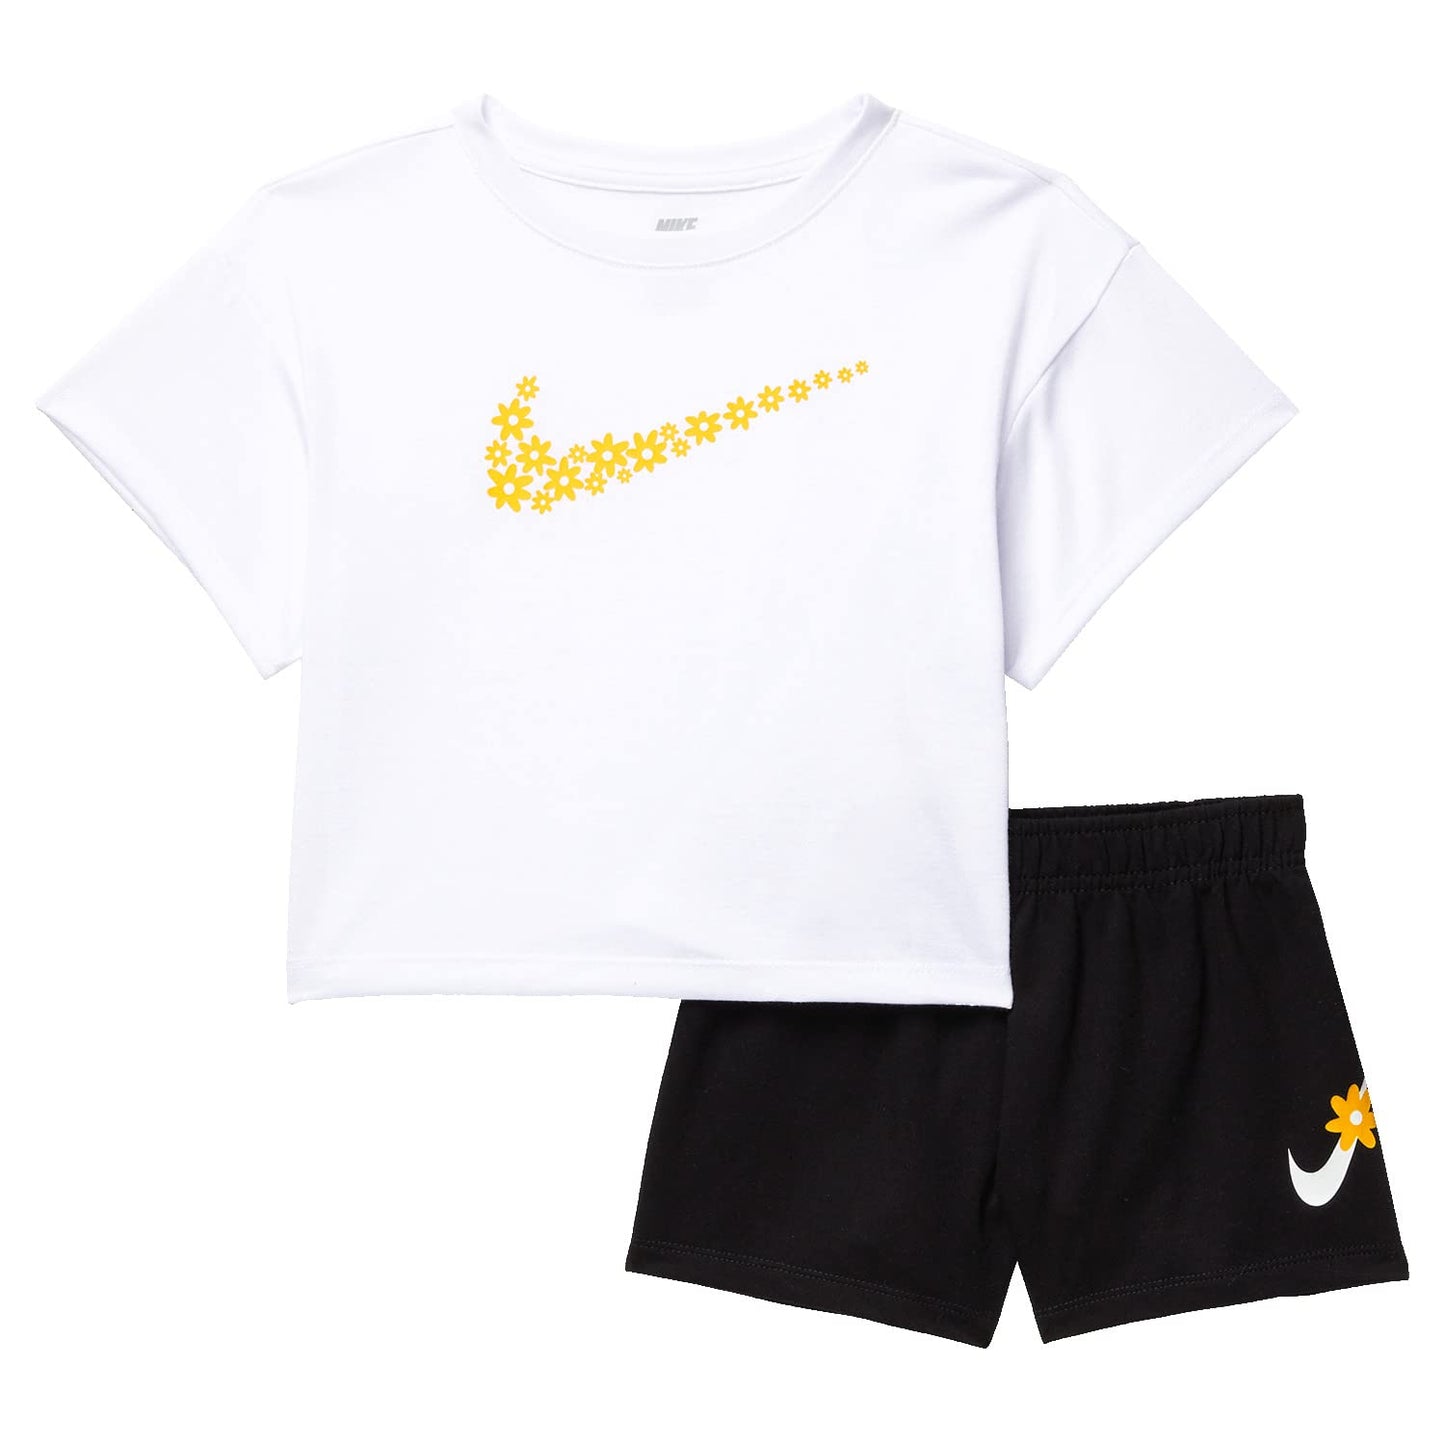 Image 1 of Daisy T-Shirt and Shorts Set (Toddler/Little Kids)